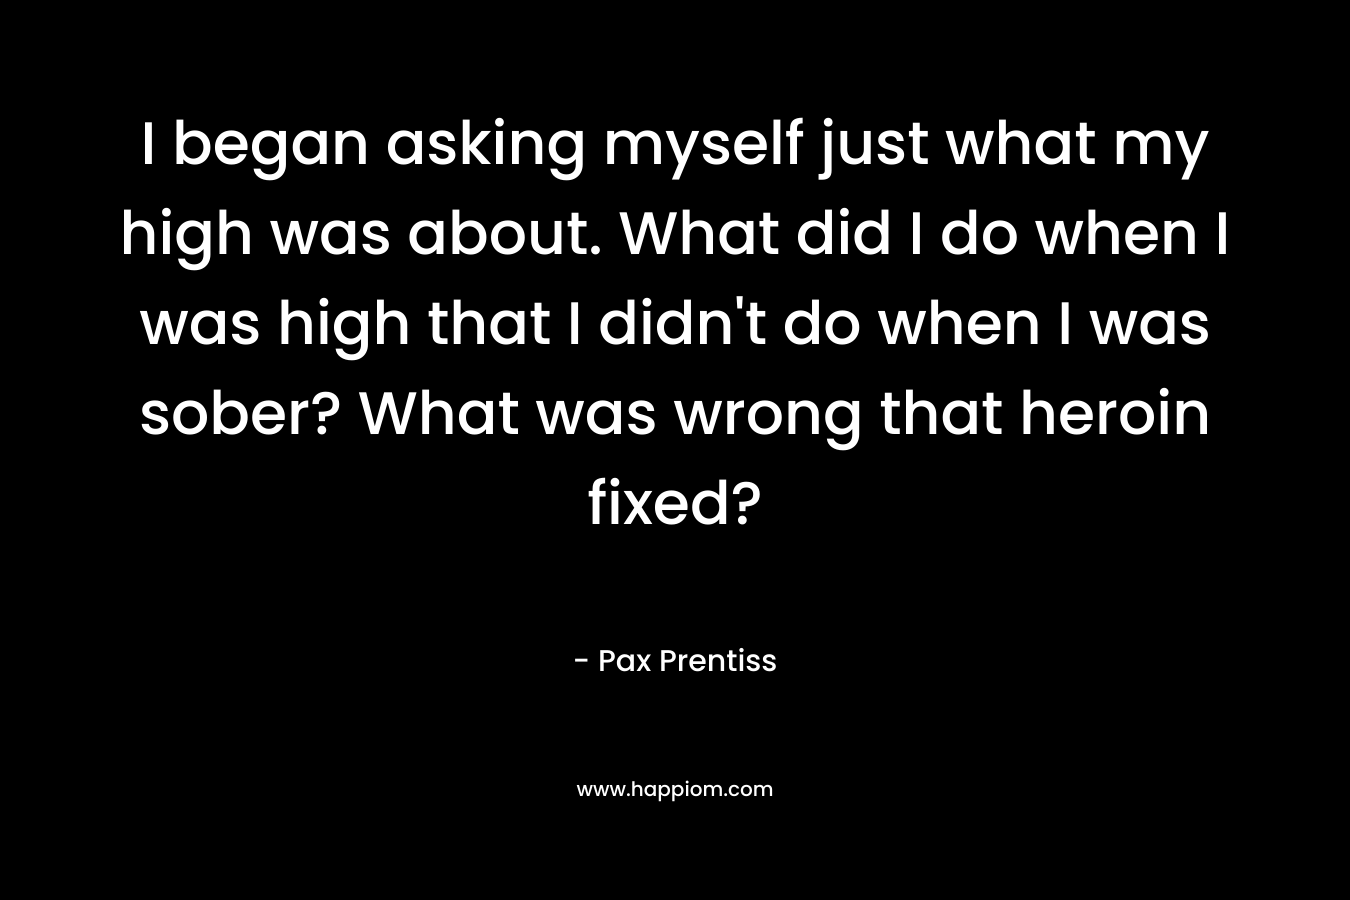 I began asking myself just what my high was about. What did I do when I was high that I didn’t do when I was sober? What was wrong that heroin fixed? – Pax Prentiss